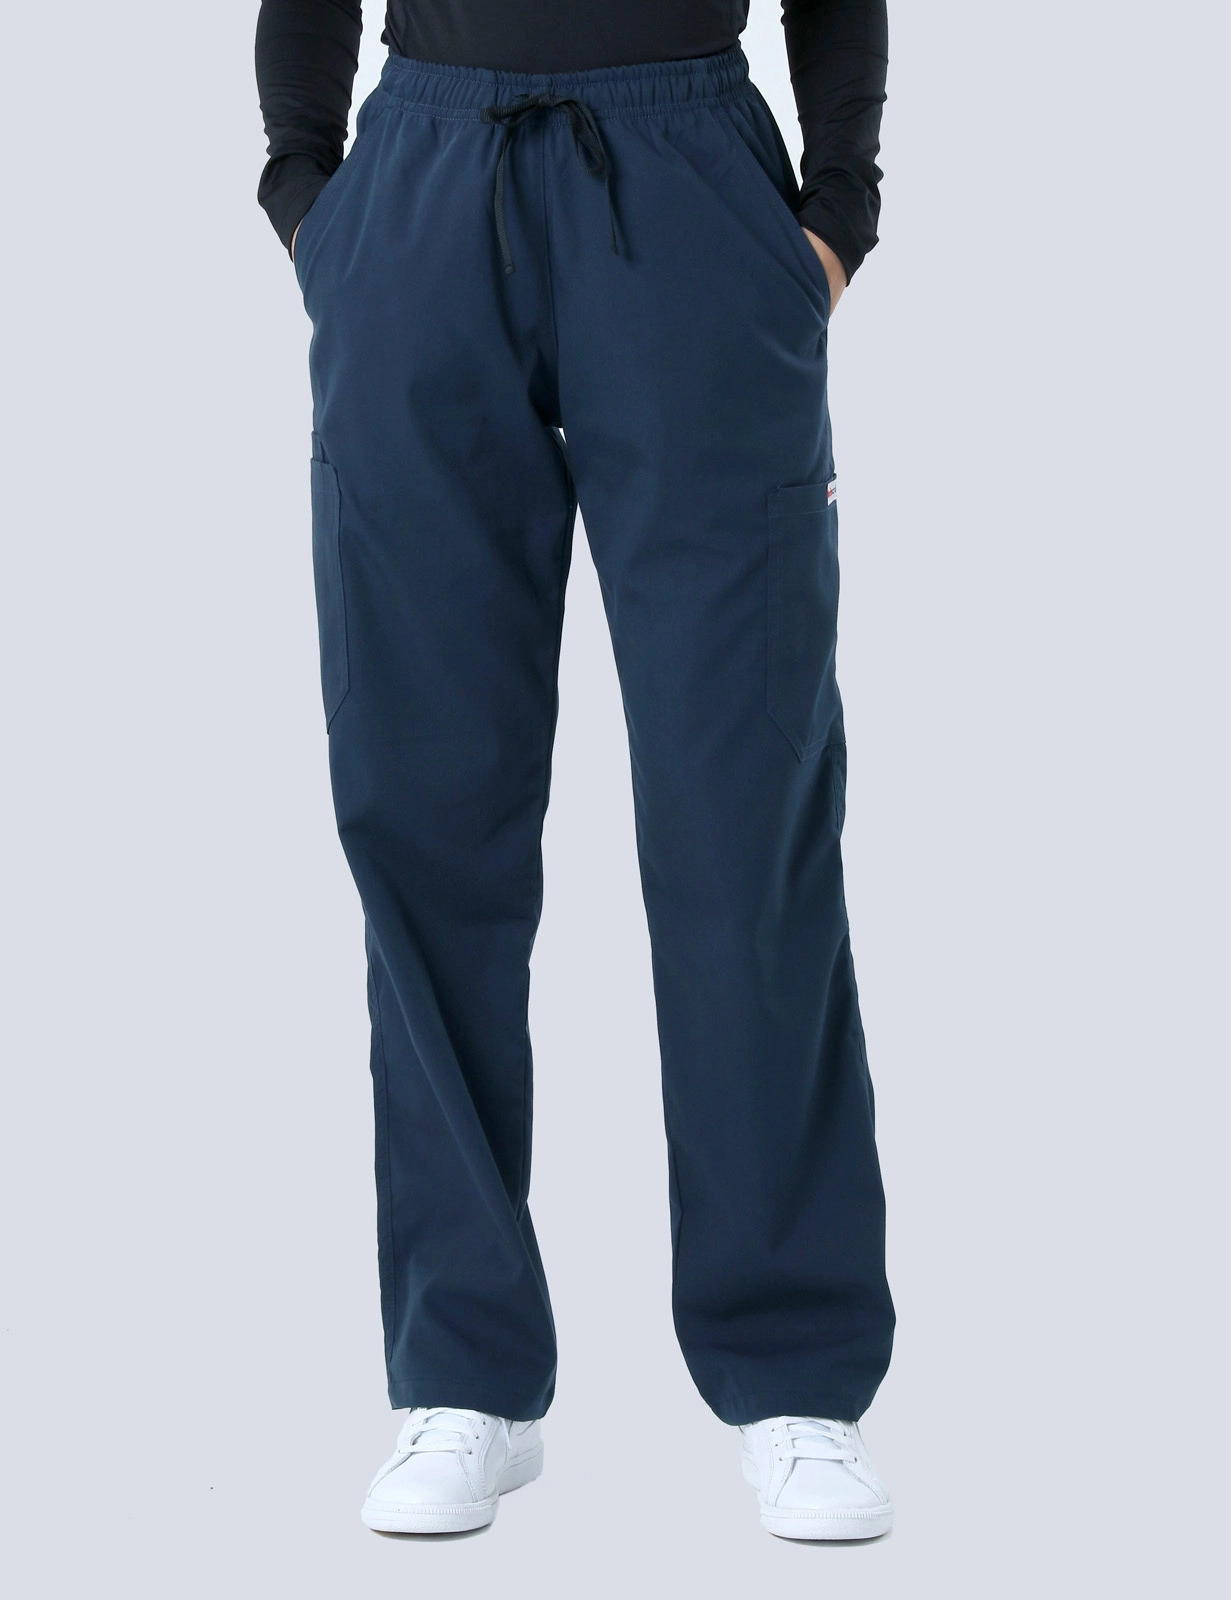 KnG Gold Care - Navy Cargo Pant